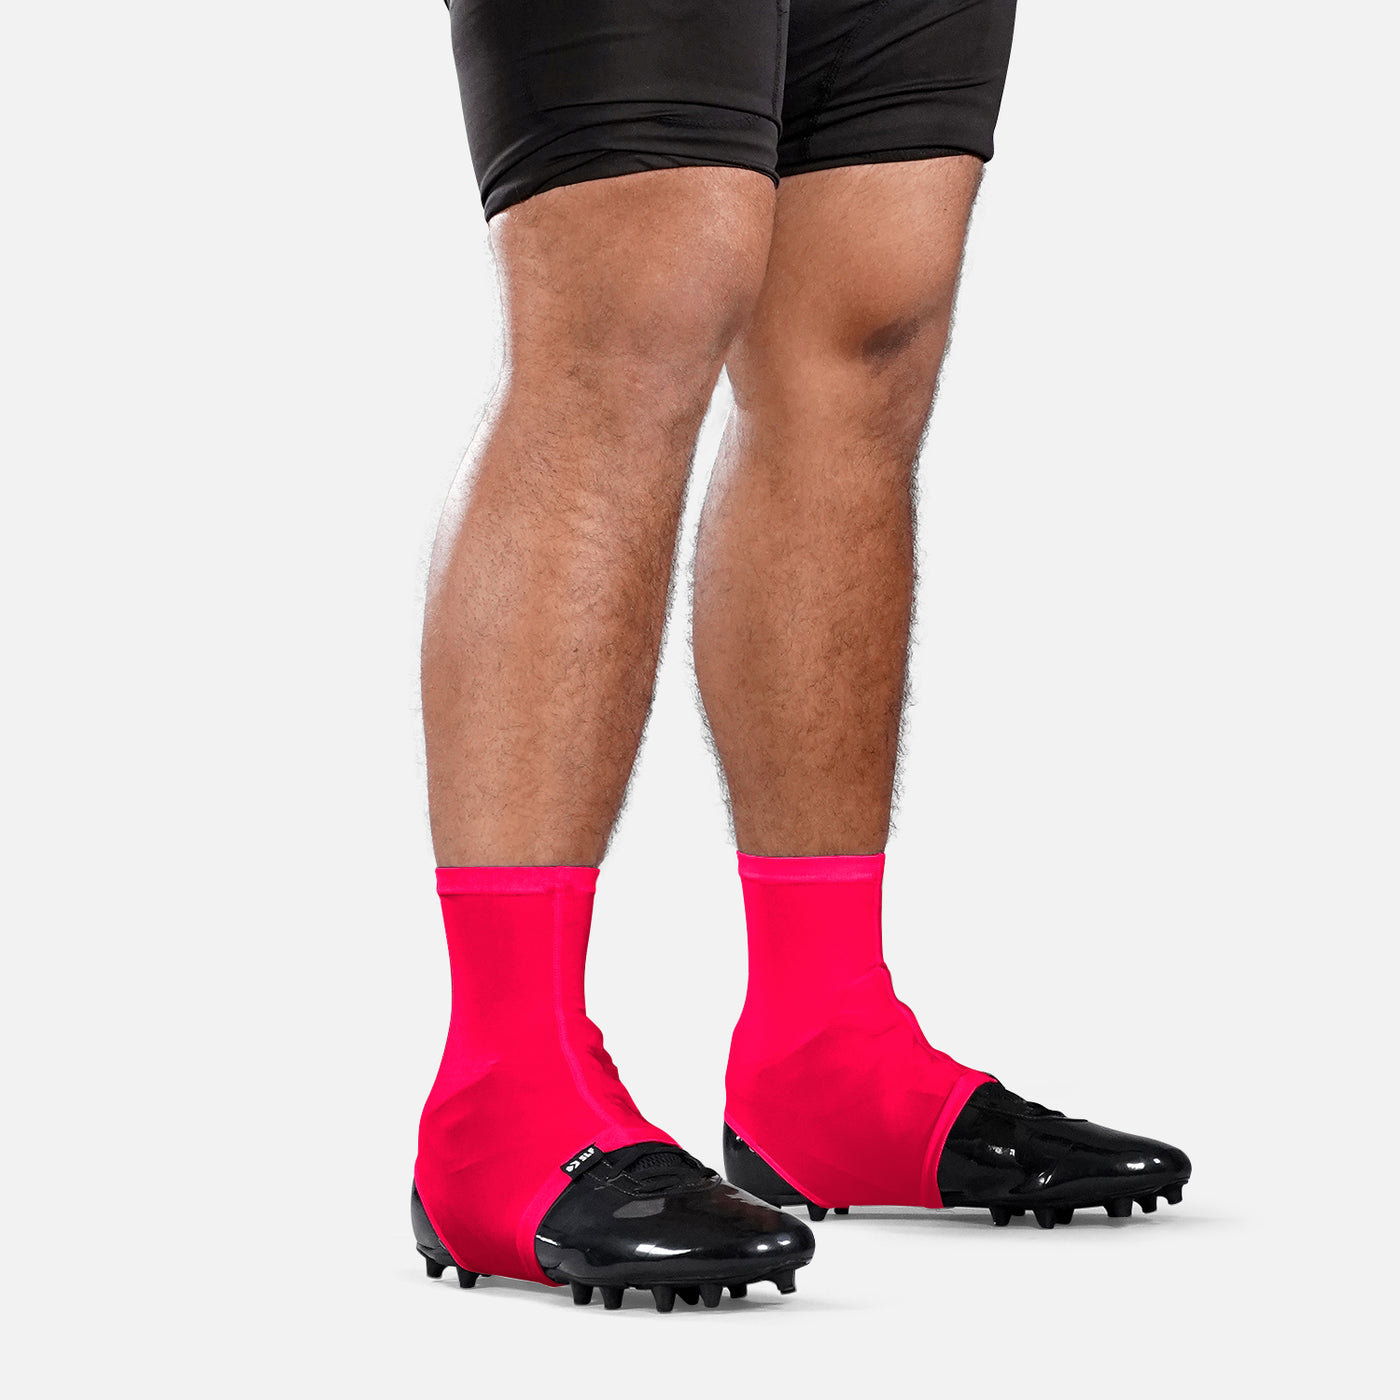 Hue Pink Spats / Cleat Covers - Big